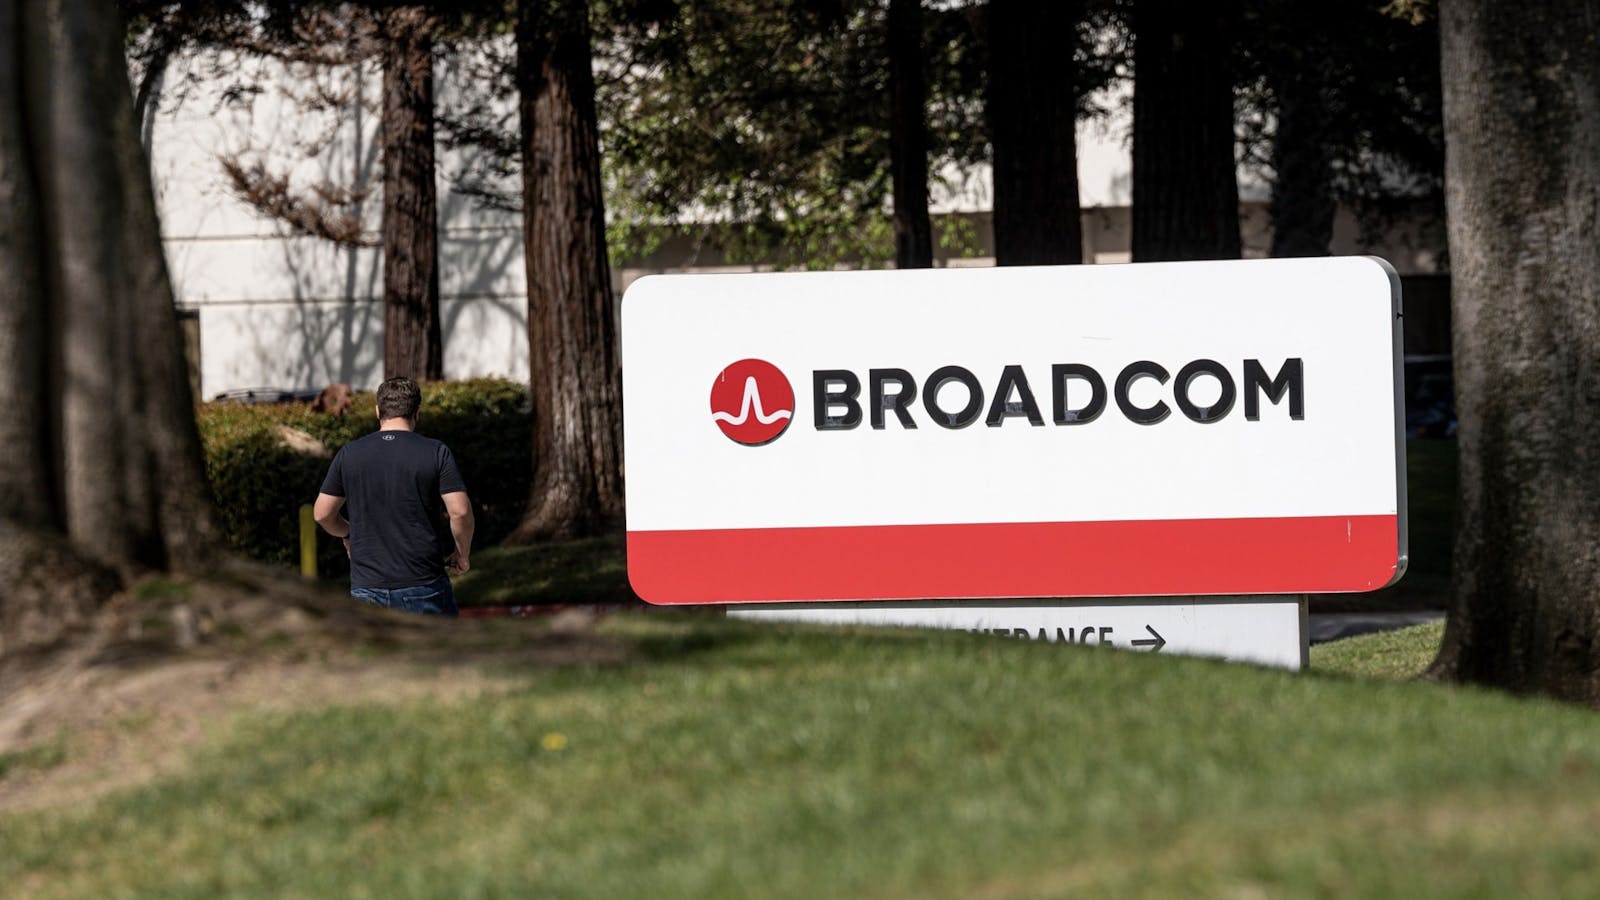 Broadcom's Silicon Valley headquarters. Photo by Bloomberg